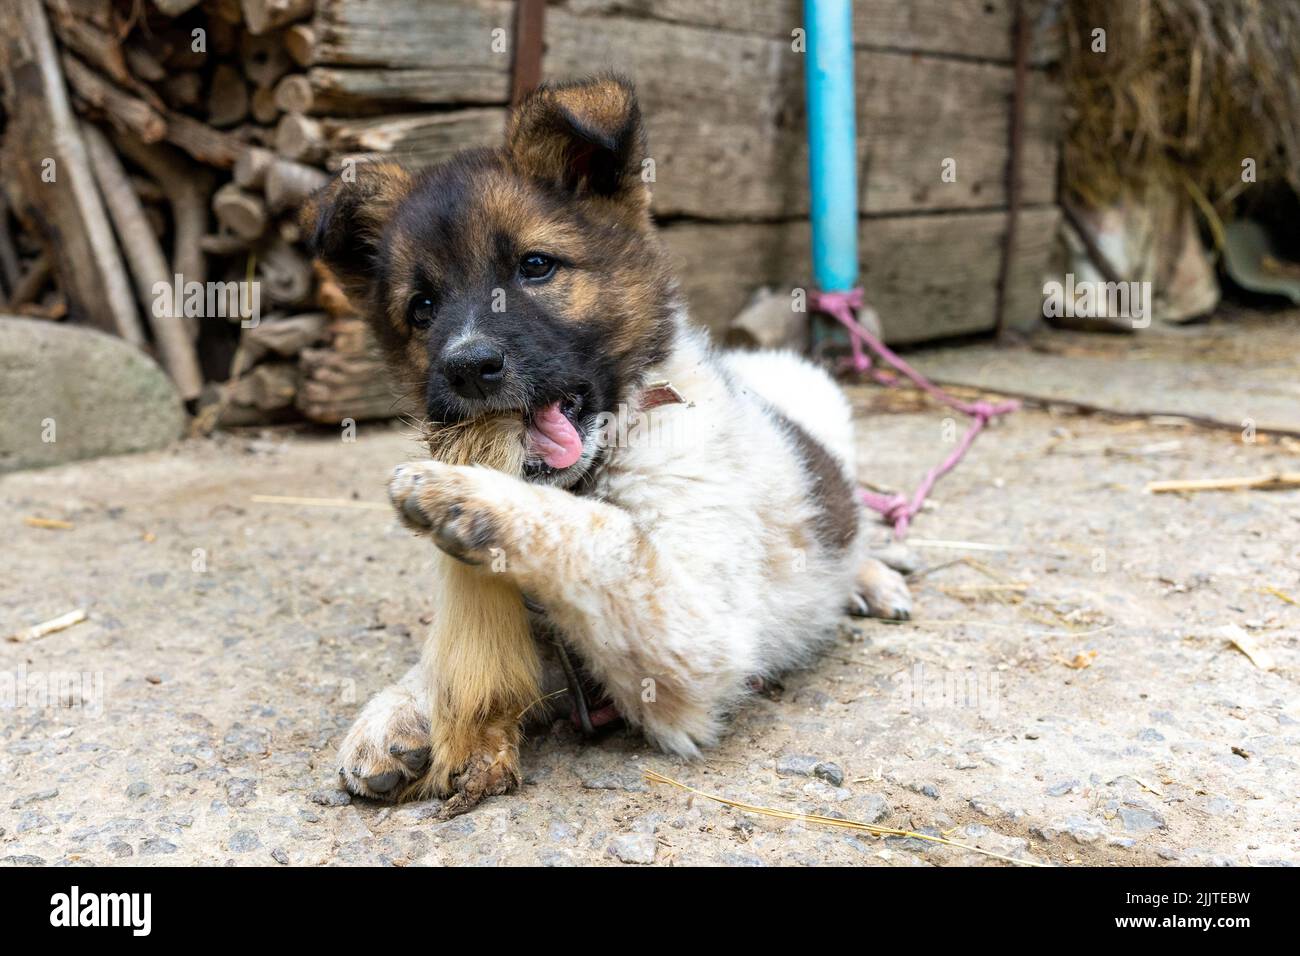 The little dog is lying down and fondly eating a goat's leg, holding it with his paw. Close up Stock Photo